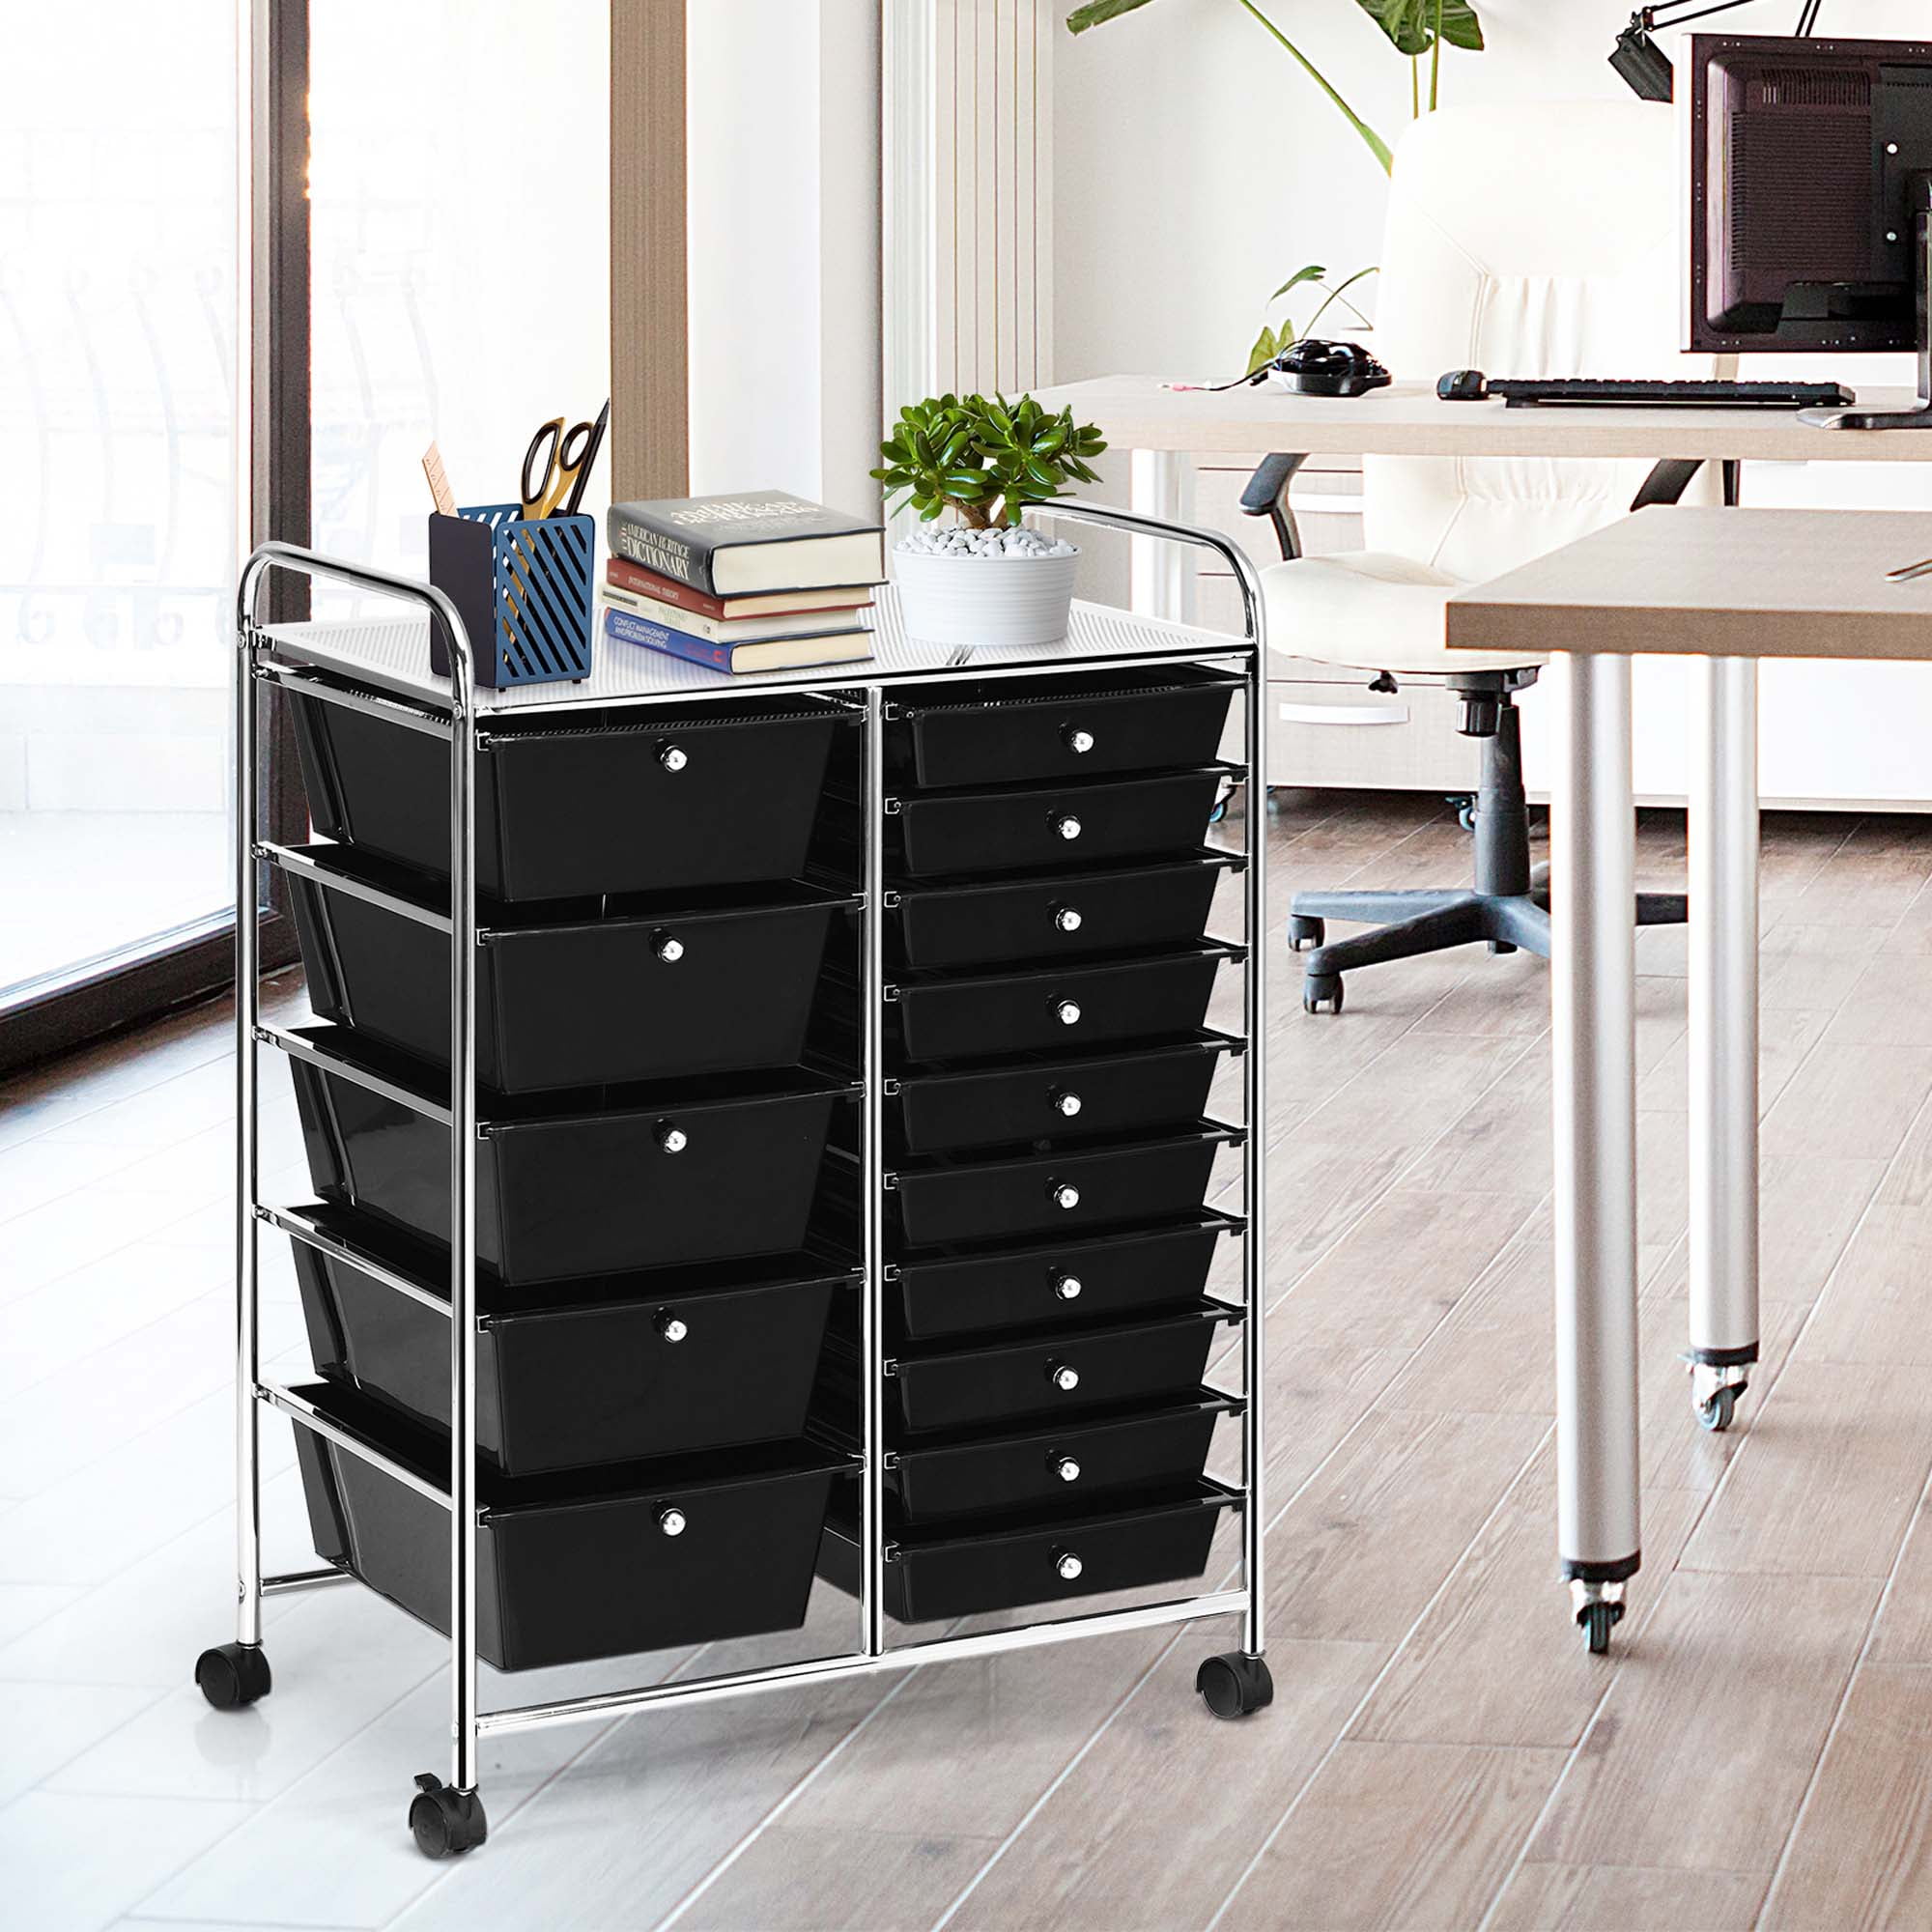 Bunpeony 15-Drawer Utility Multicolor Rolling Storage Cart